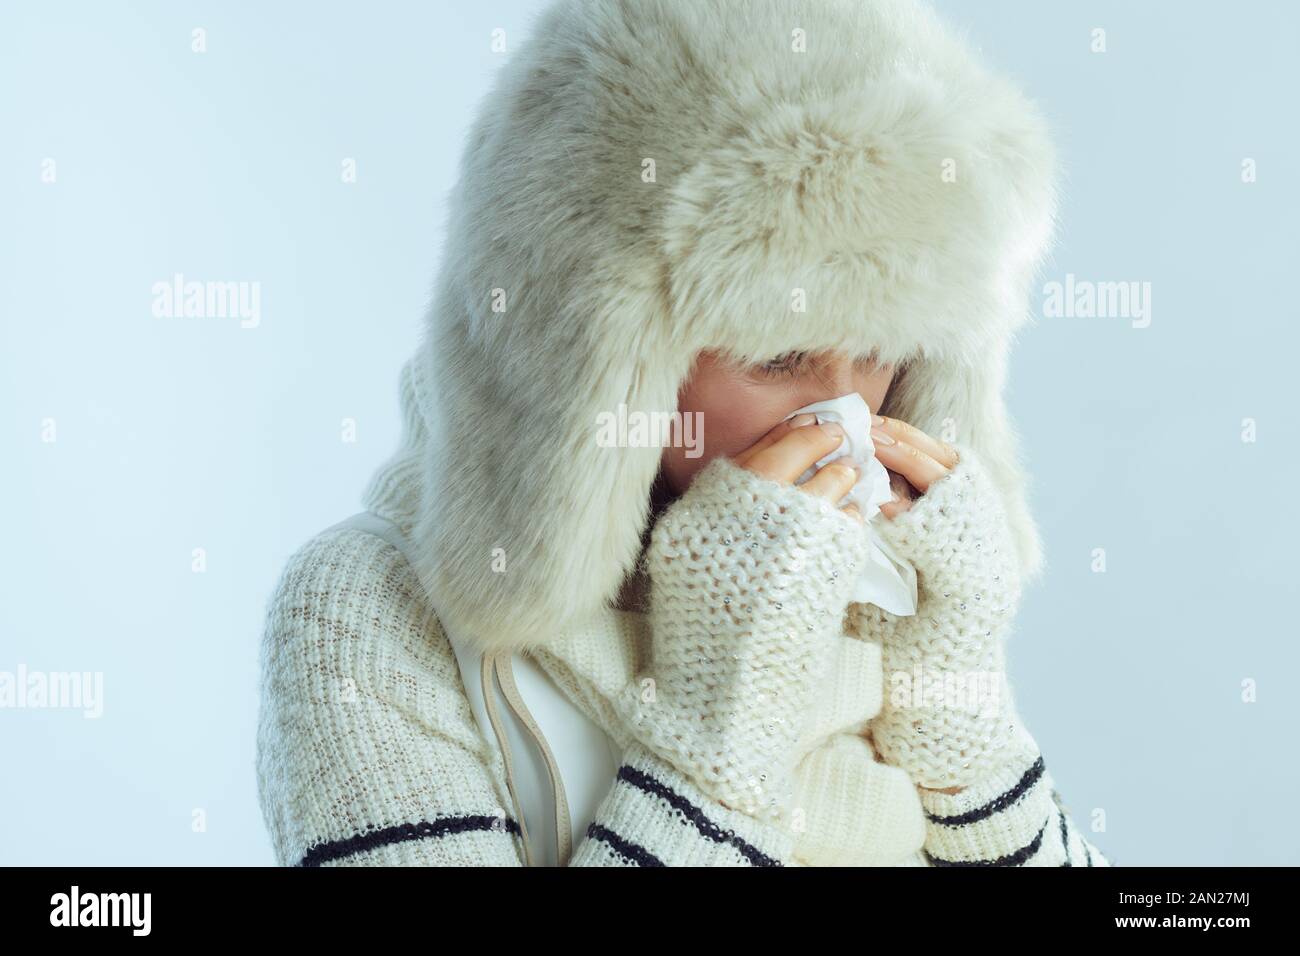 sad modern 40 years old woman in white striped sweater, scarf and ear flaps hat wiping nose with napkin on winter light blue background. Stock Photo